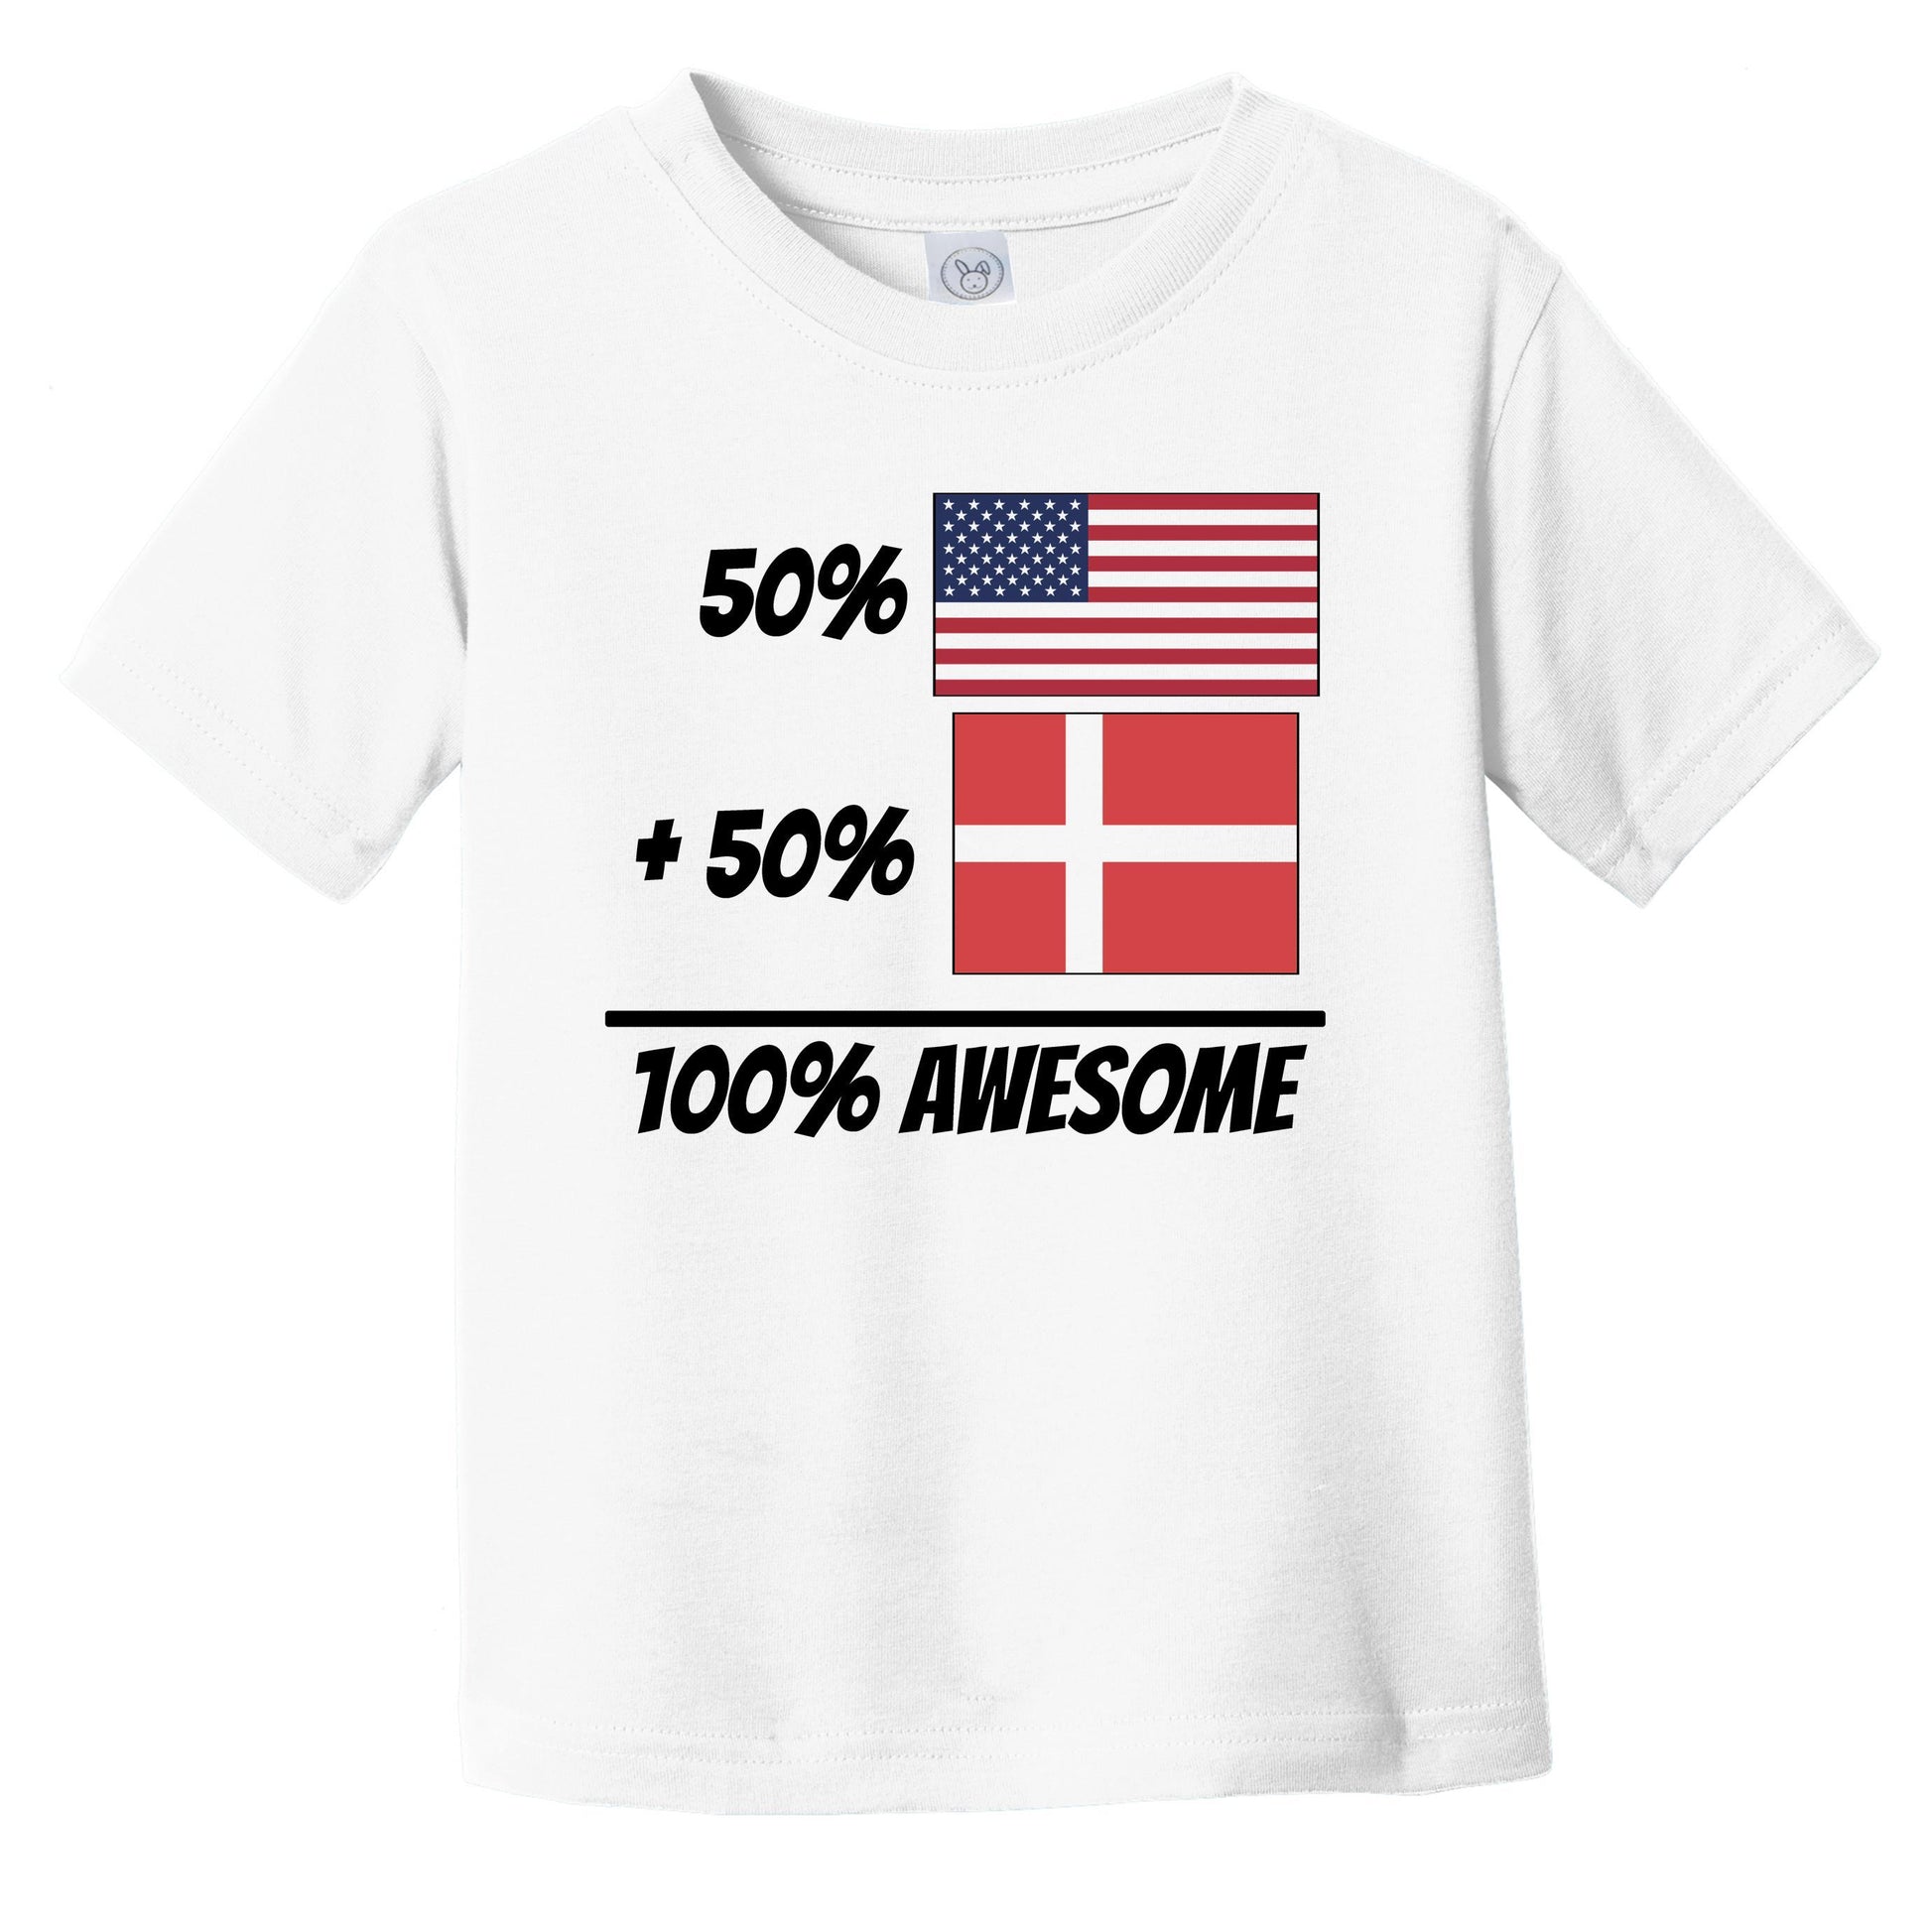 50% American Plus 50% Danish Equals Cute Denmark Flag Inf – Really Awesome Shirts